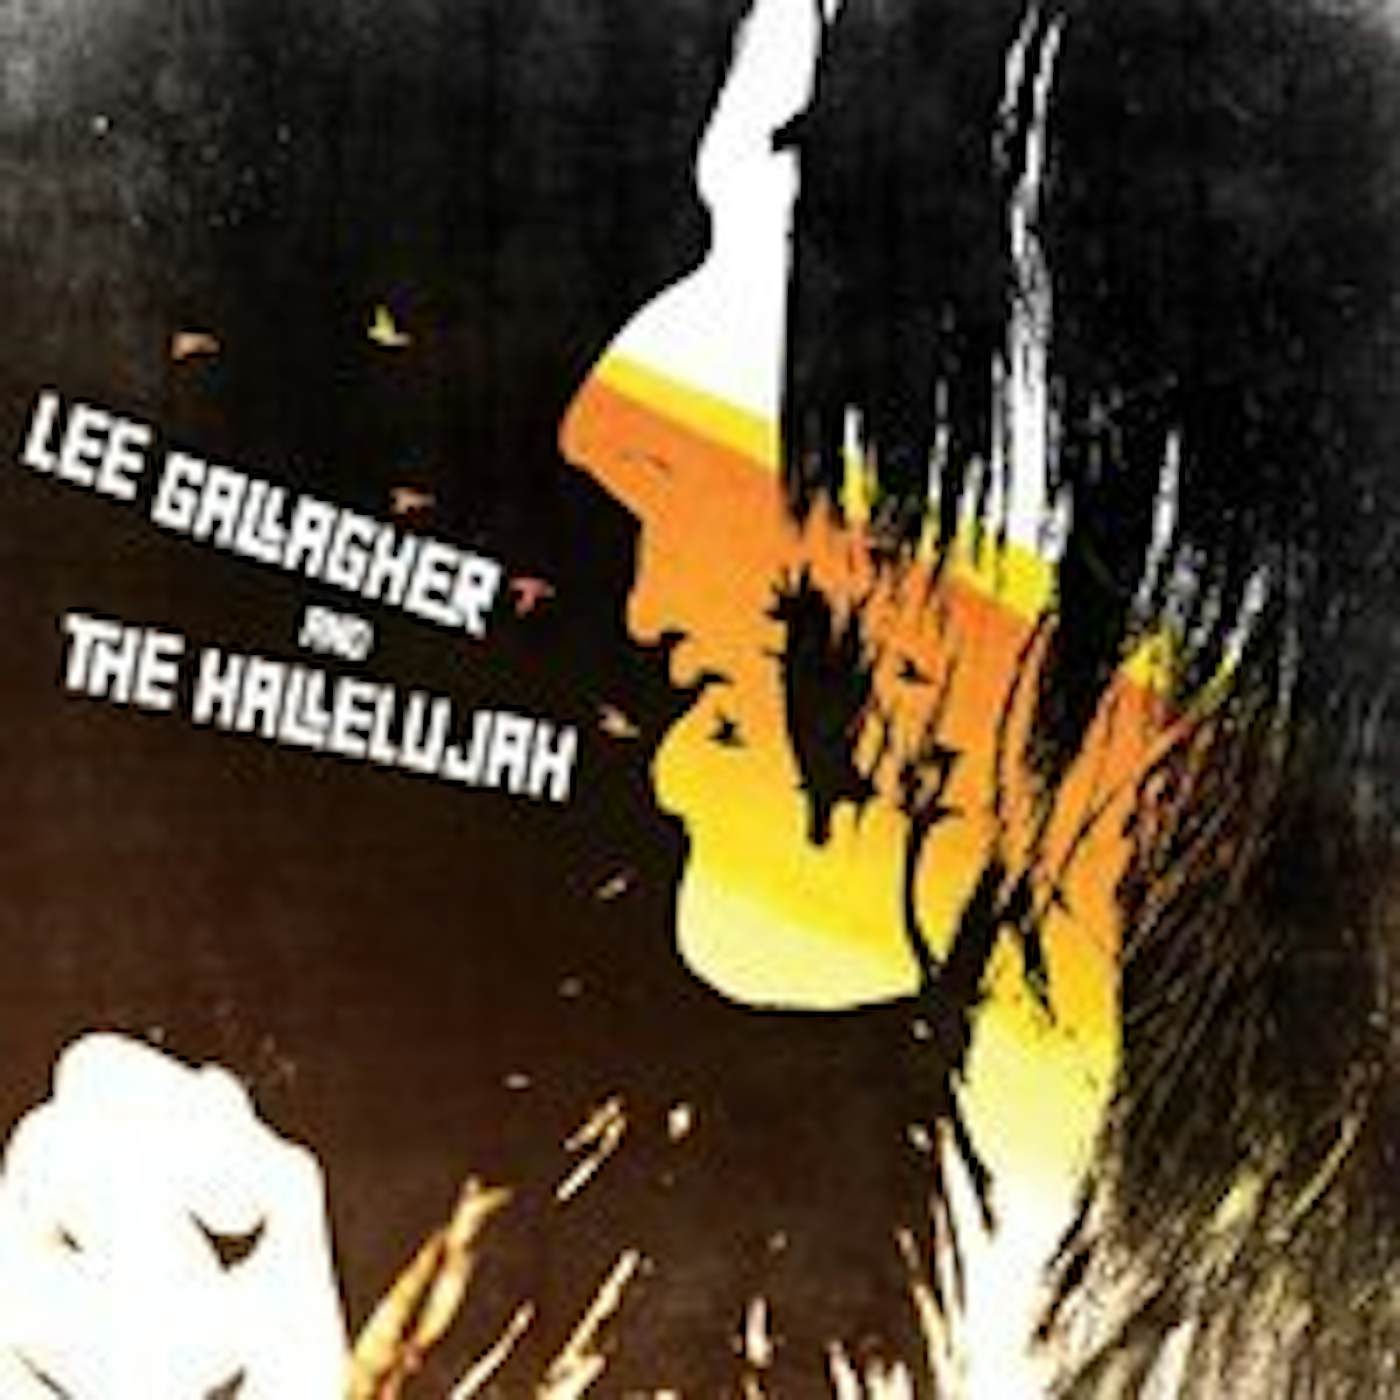 LEE GALLAGHER AND THE HALLELUJAH CD